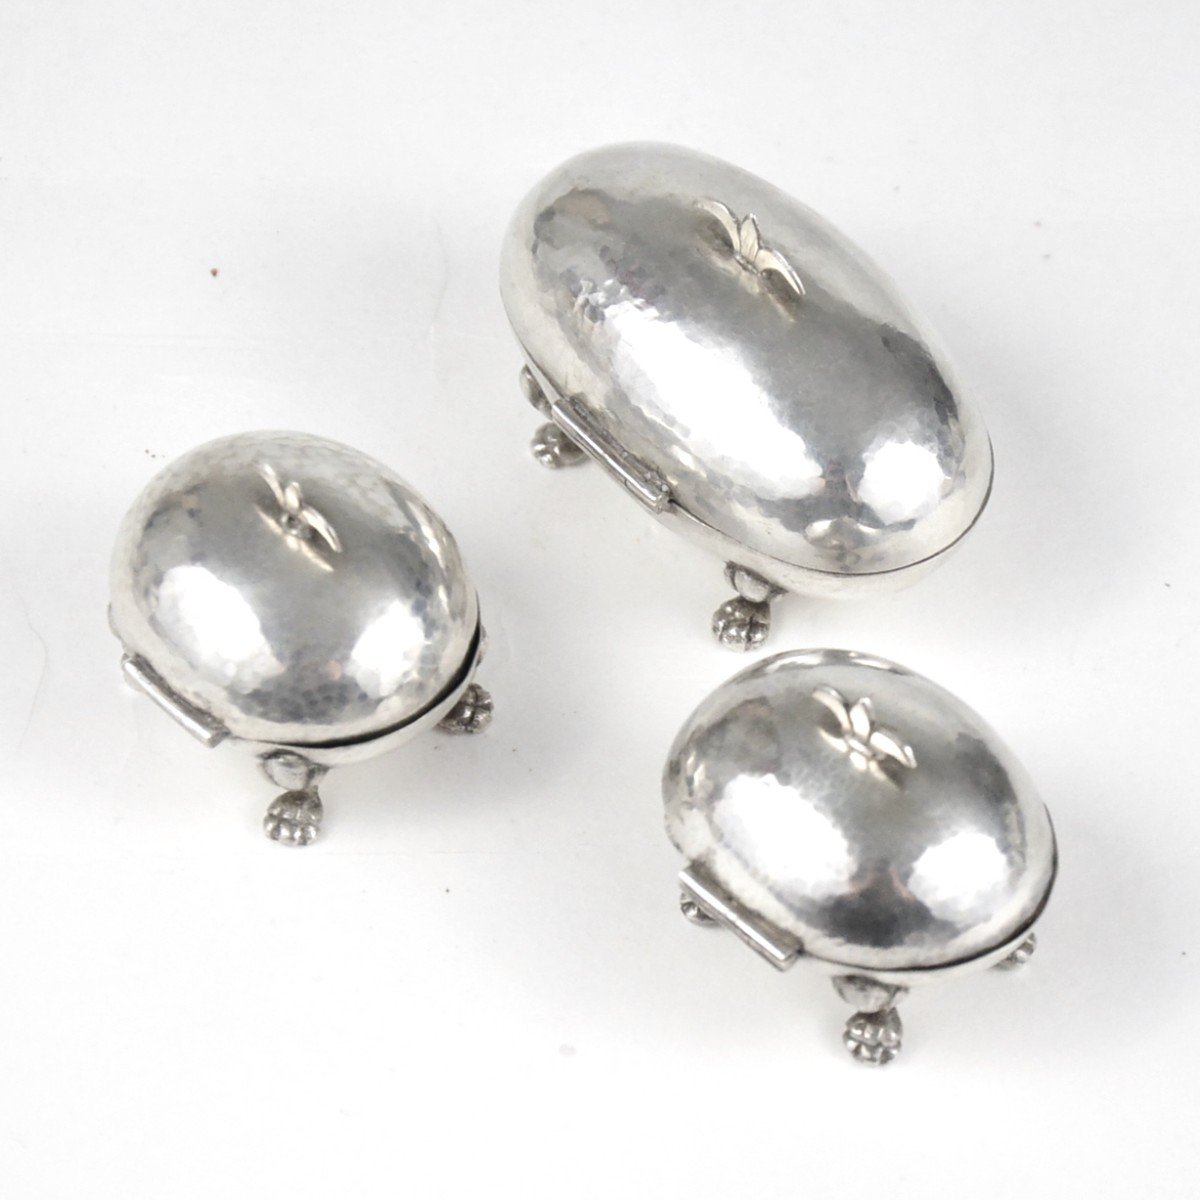 Two Mustard Pots And A Saltcellar In Sterling Silver Feet In The Shape Of Lion Paws Spain-photo-1